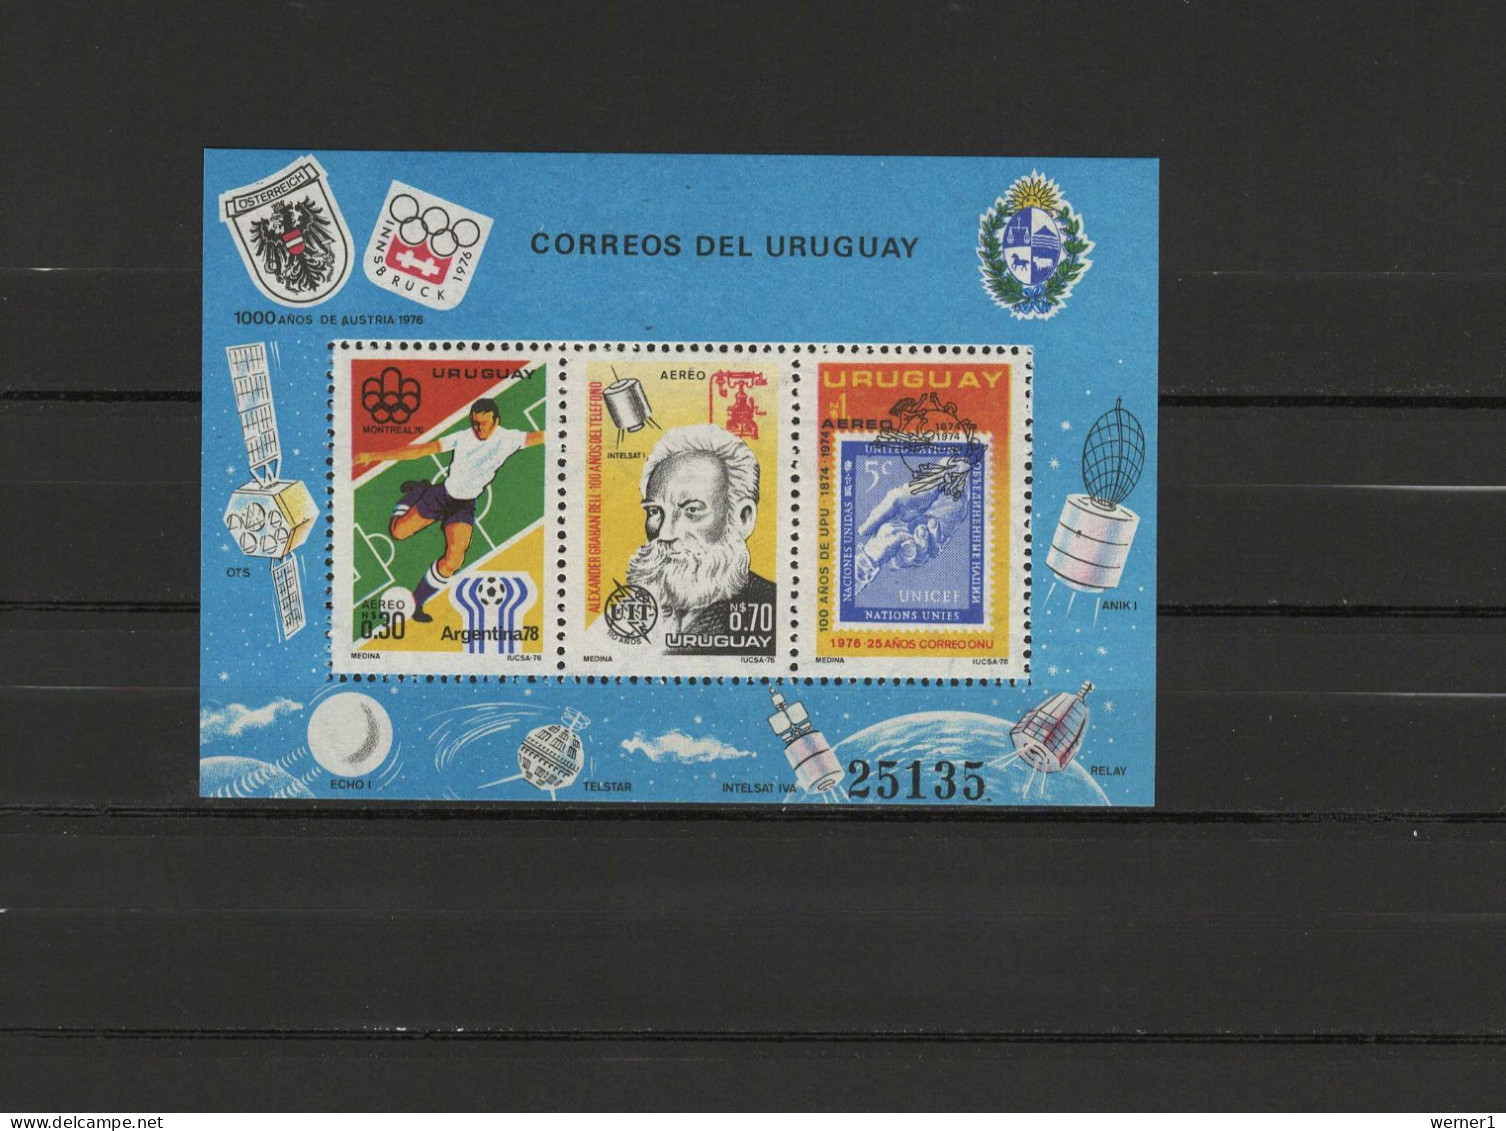 Uruguay 1976 Olympic Games Montreal / Innsbruck, Football Soccer World Cup, Space S/s MNH -scarce- - Sommer 1976: Montreal